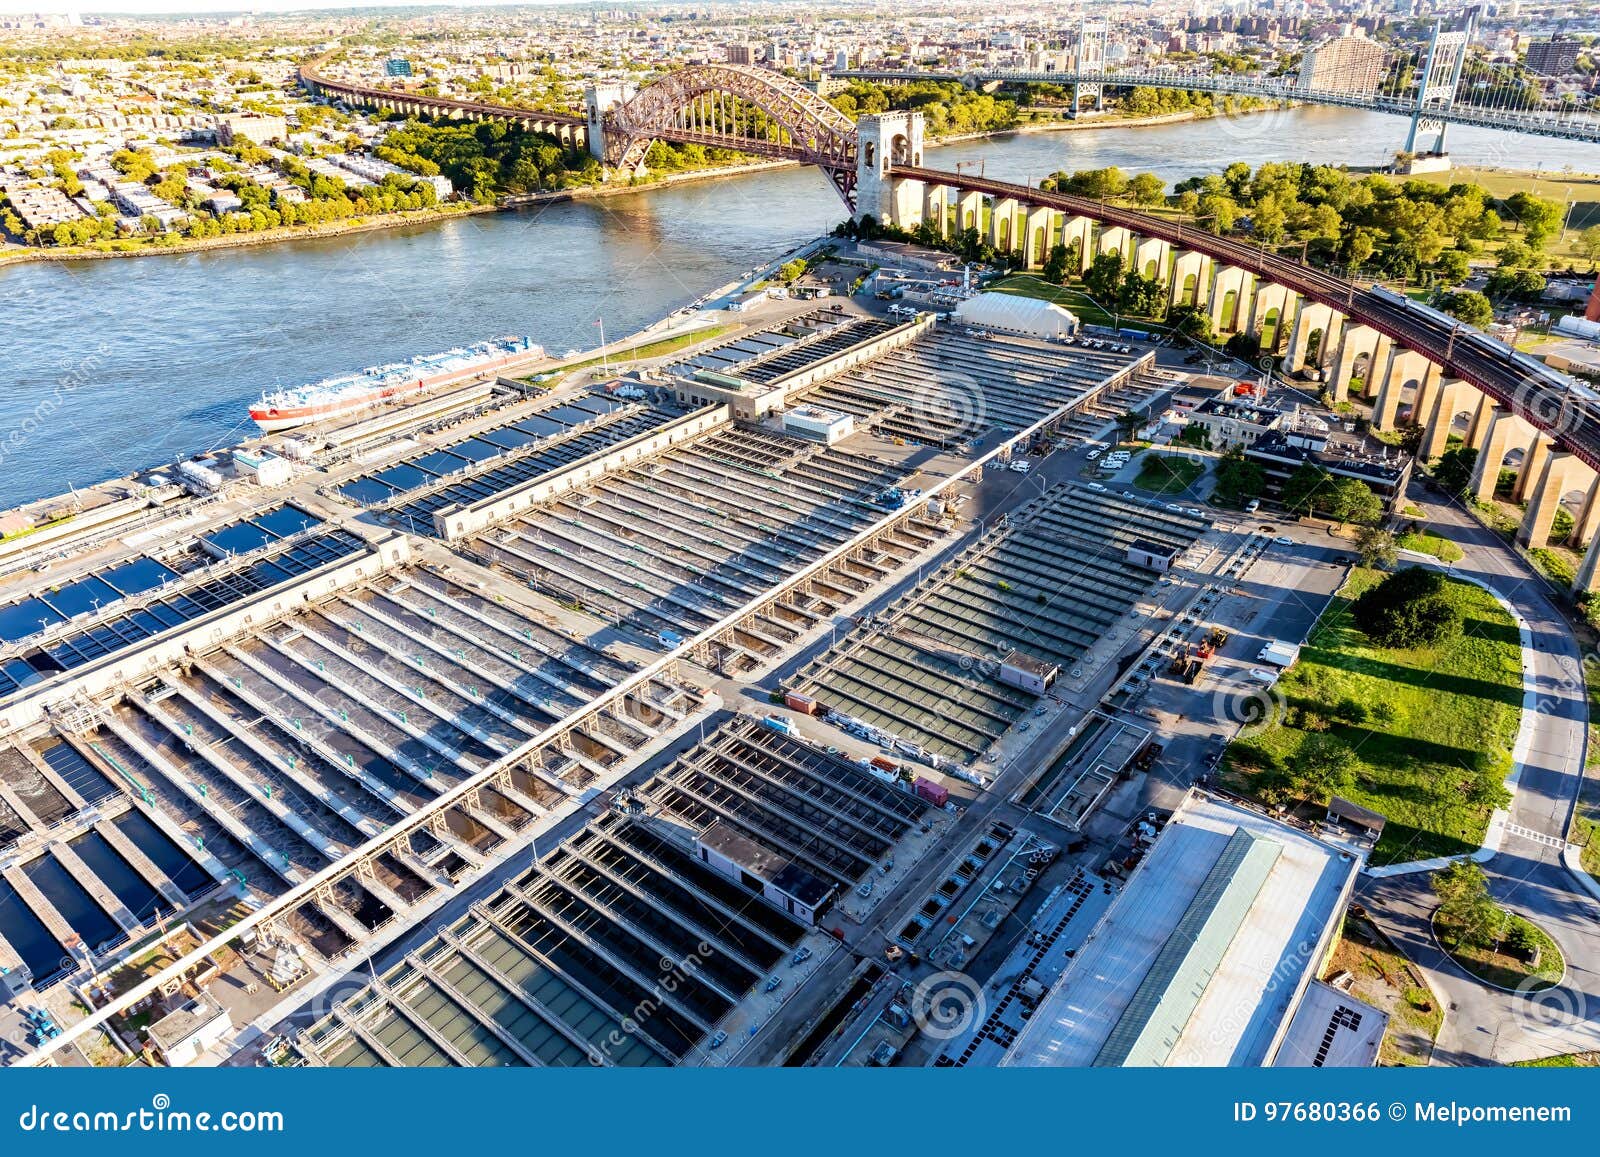 aerial view of wards island wastewater treatment plant in ny